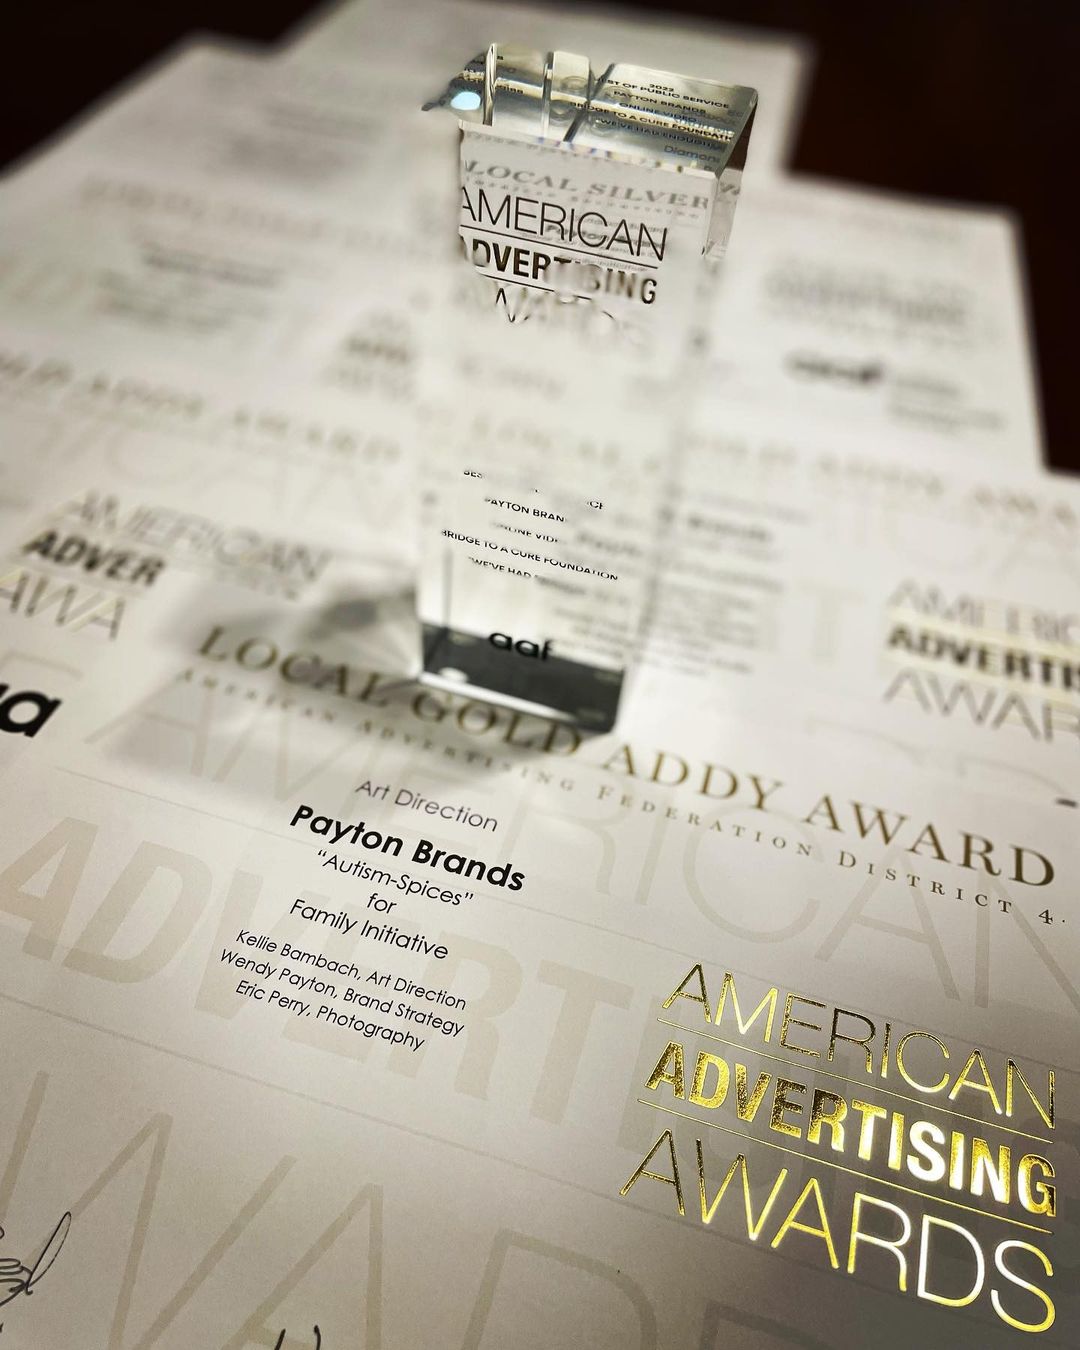 Payton Brands Earns American Advertising Awards “2022 Best of Public Service” Recognition